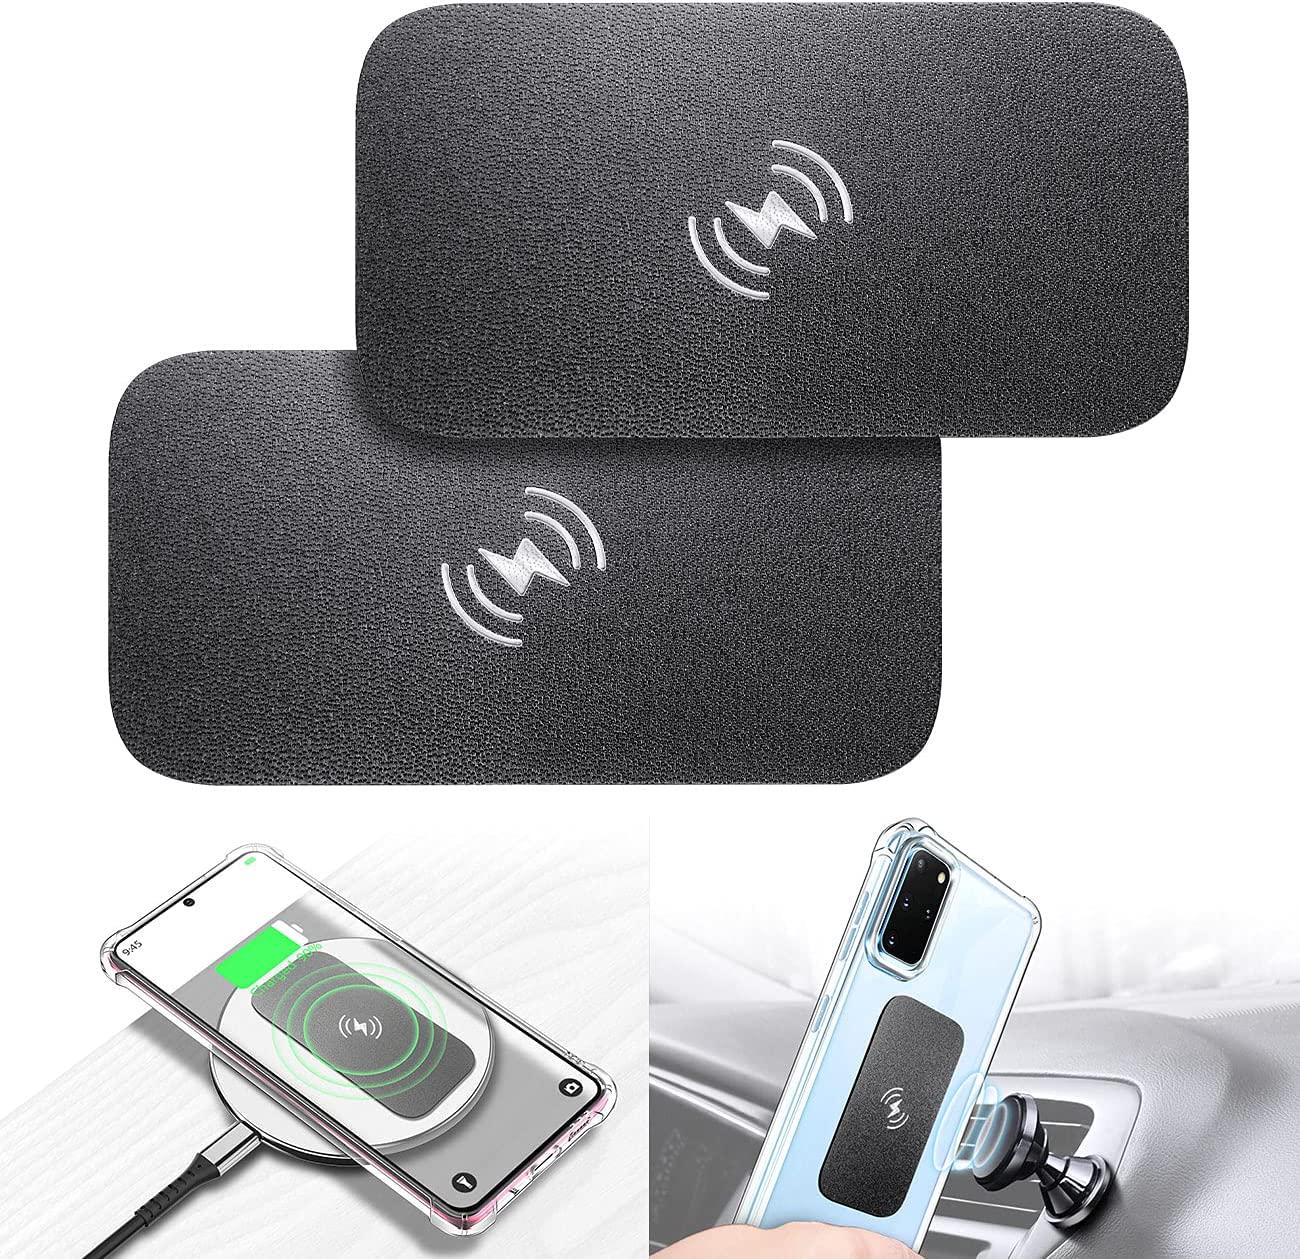 eSamcore, eSamcore Metal Plate for Phone Magnet, Wireless Charging Compatible Phone Metal Plate Sticker for Magnetic Phone Mount Holder for Car [Full Size] for Large Cell Phone 3.3 X 1.7 Inch [2-Pack]